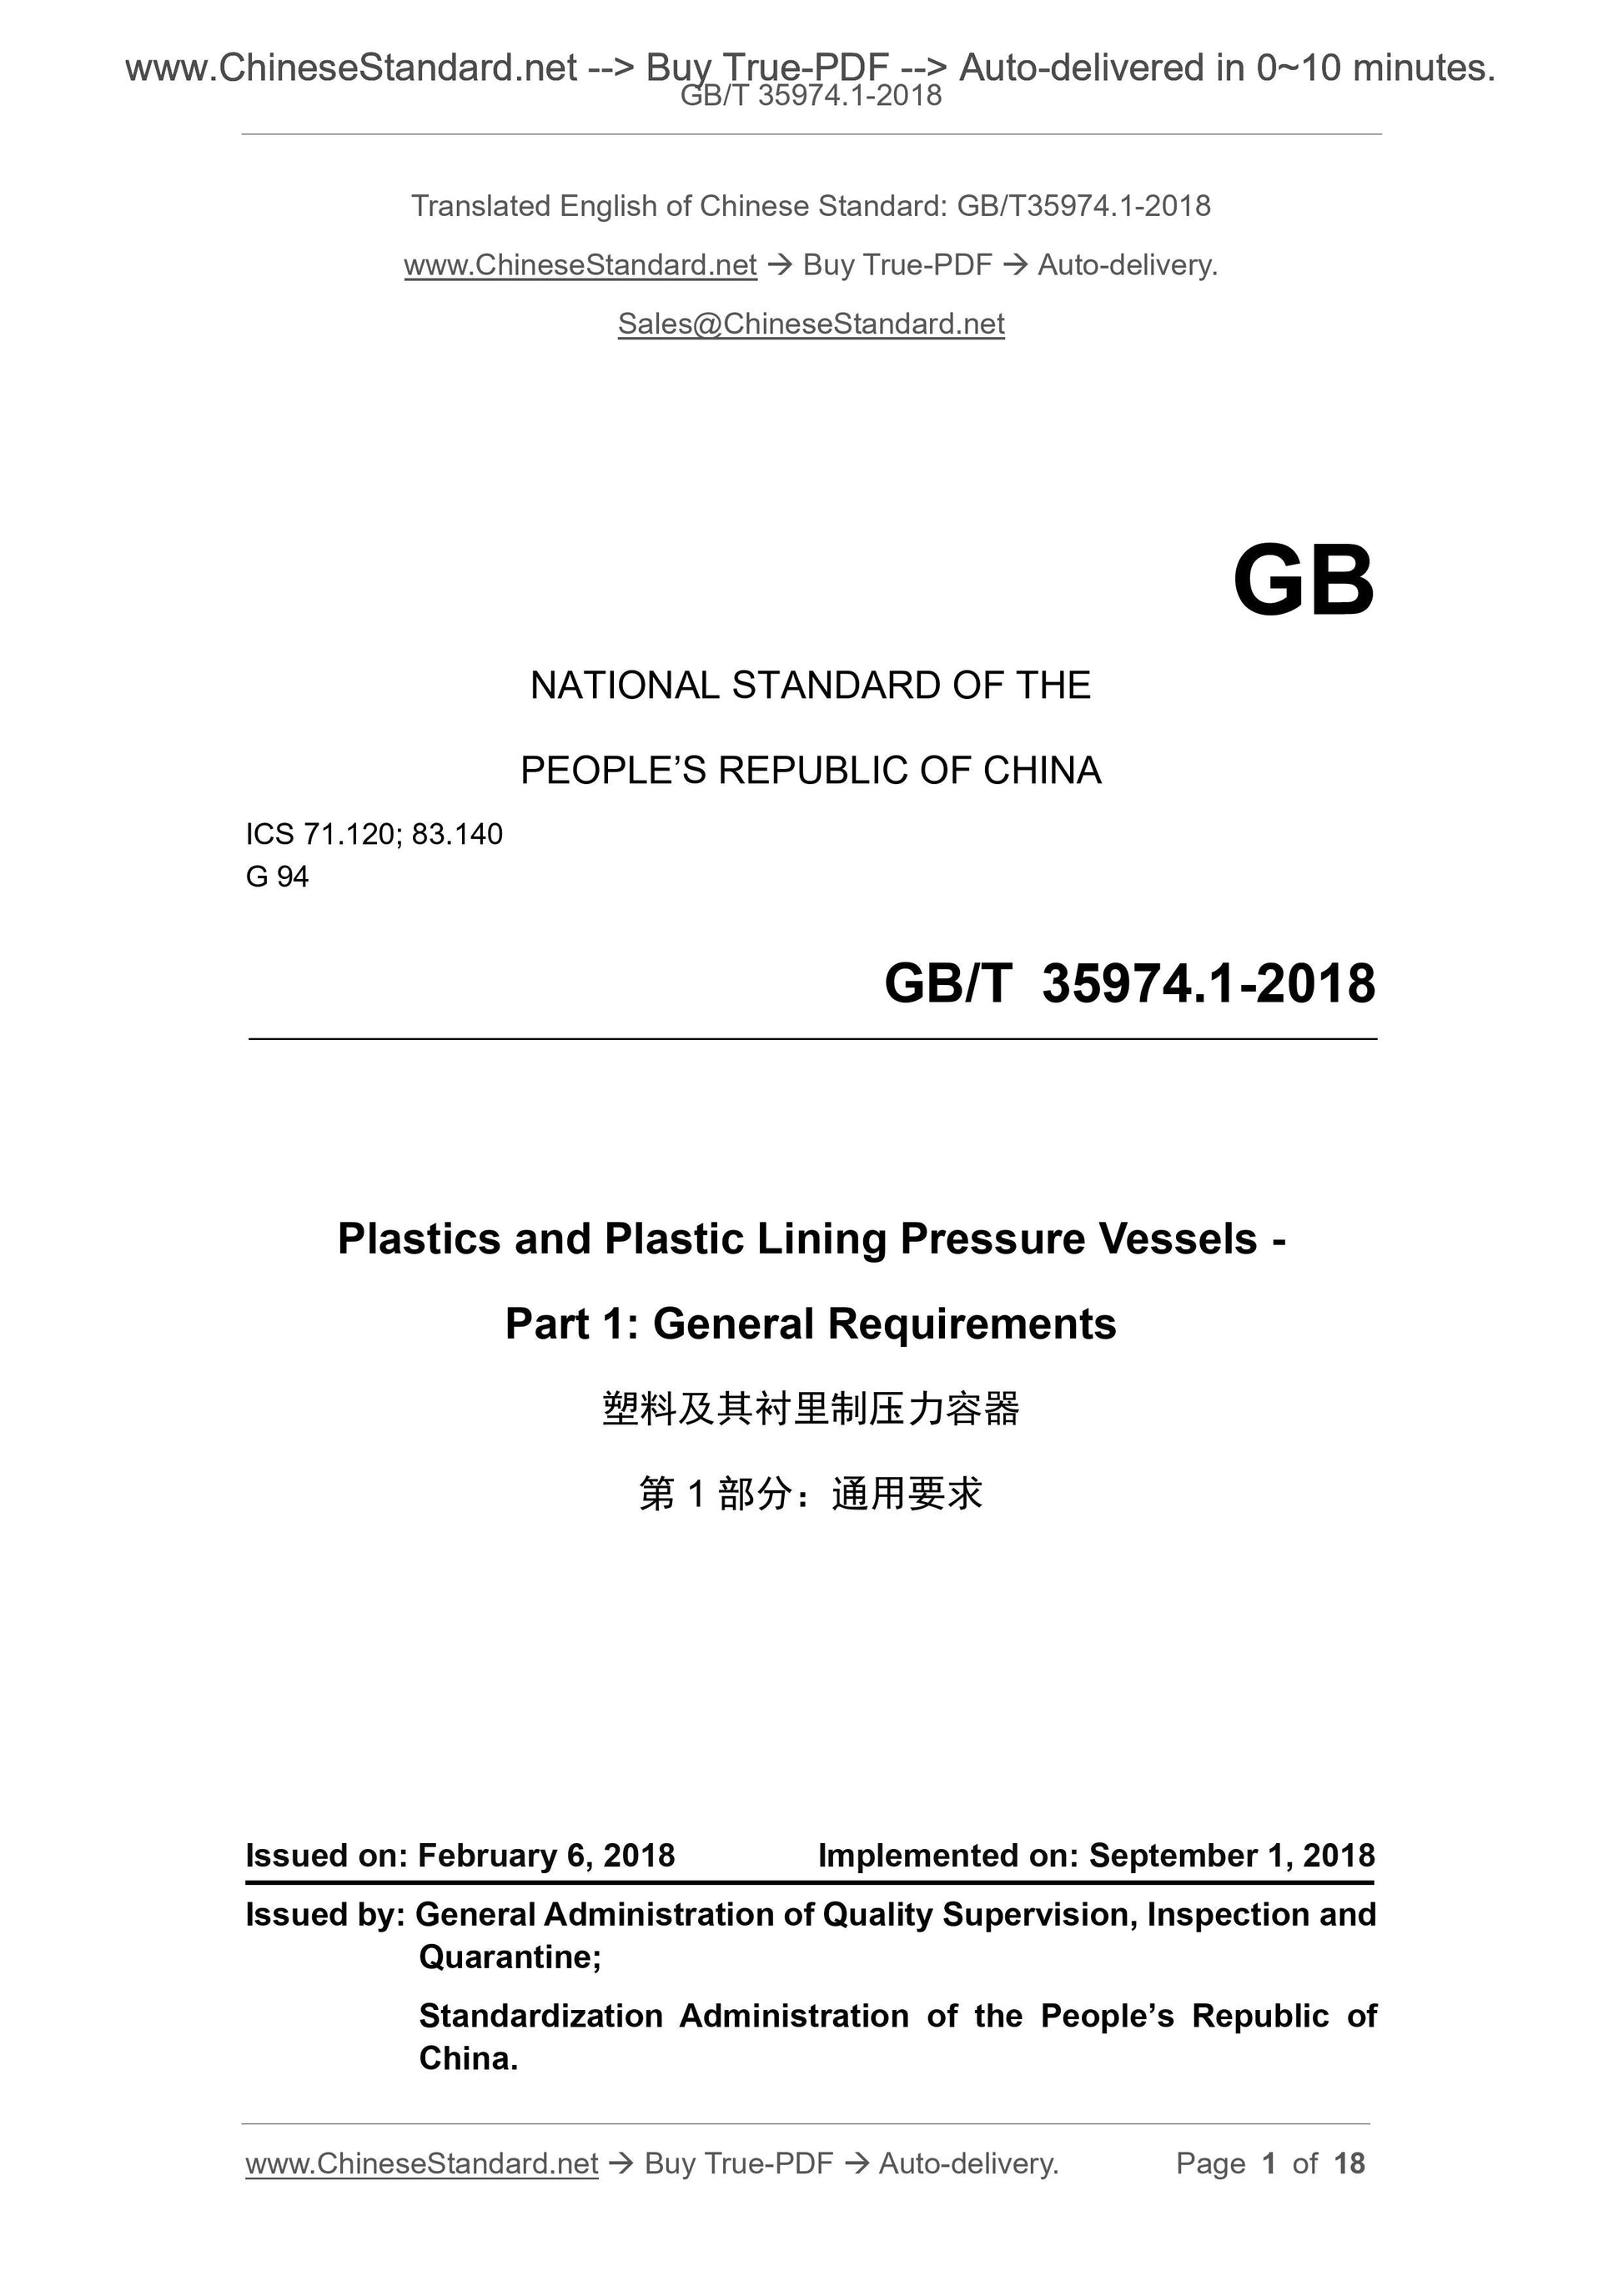 GB/T 35974.1-2018 Page 1